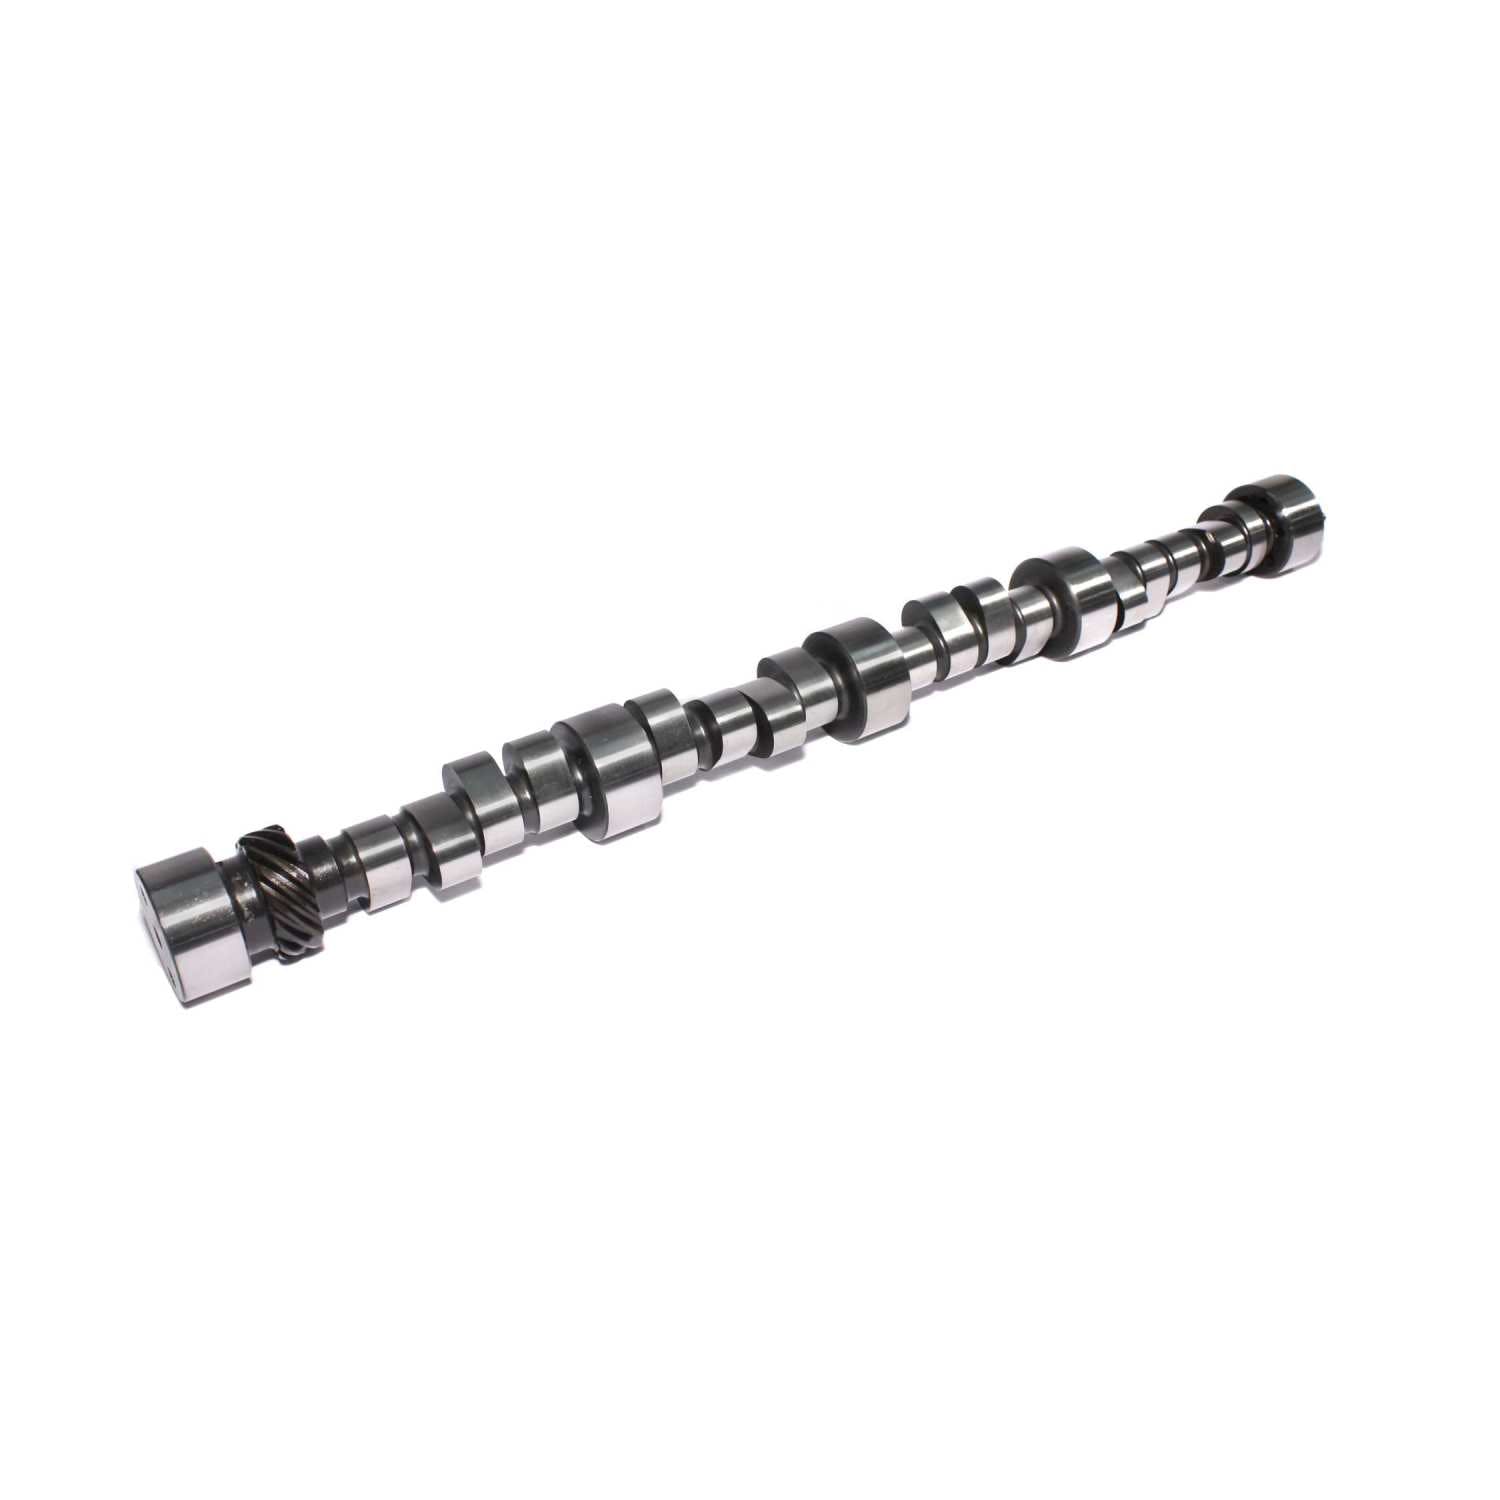 Competition Cams 11-733-9 Drag Race Camshaft